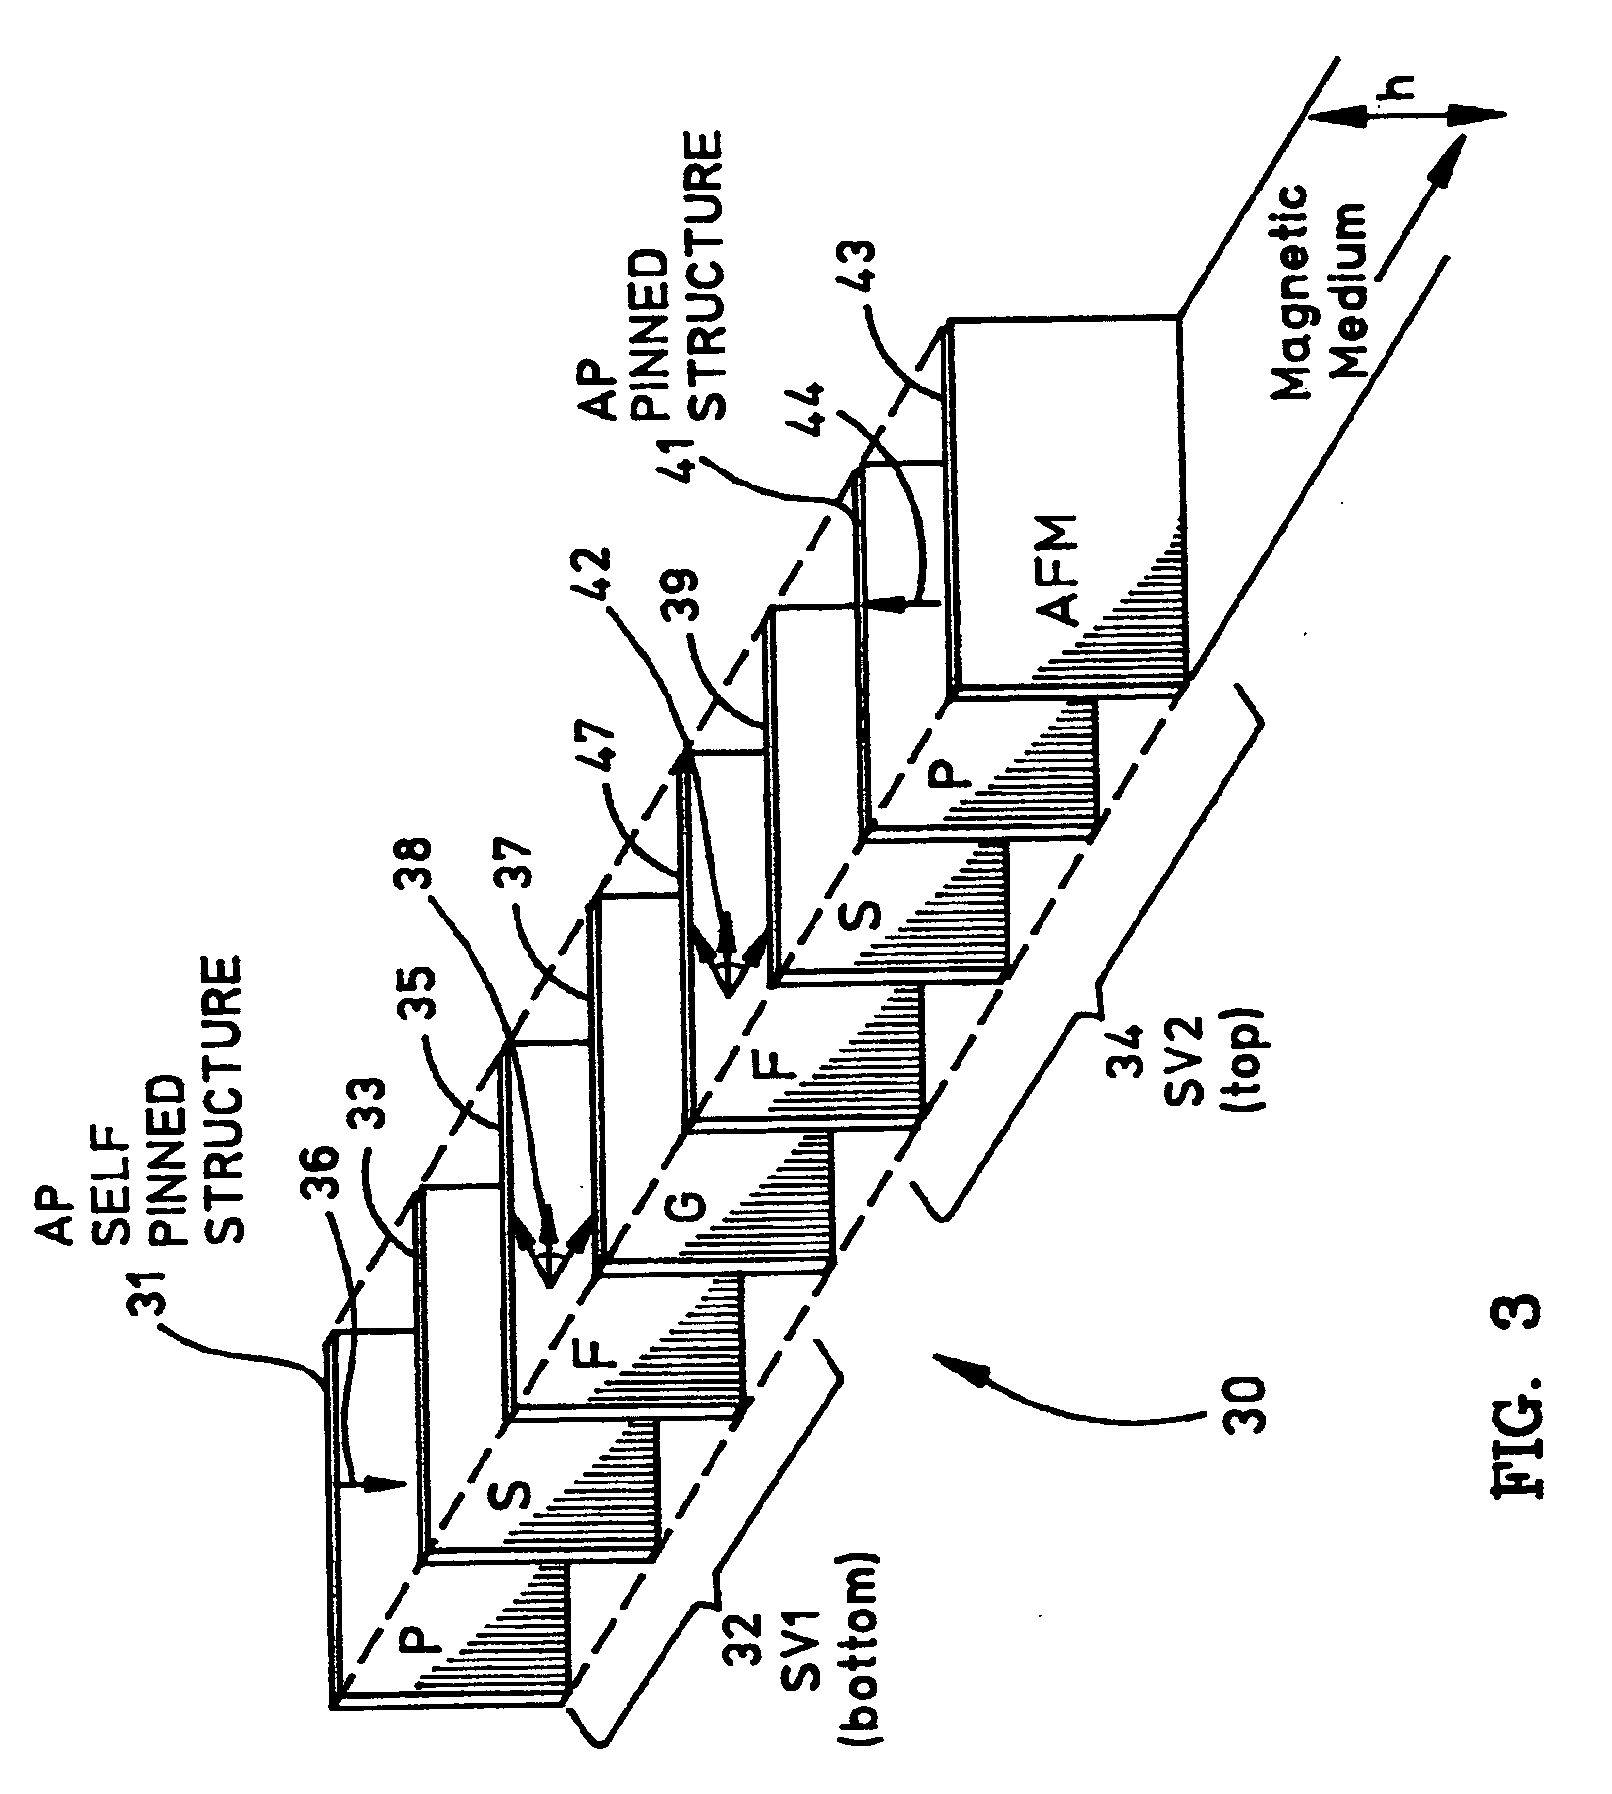 Differential spin valve sensor having both pinned and self-pinned structures